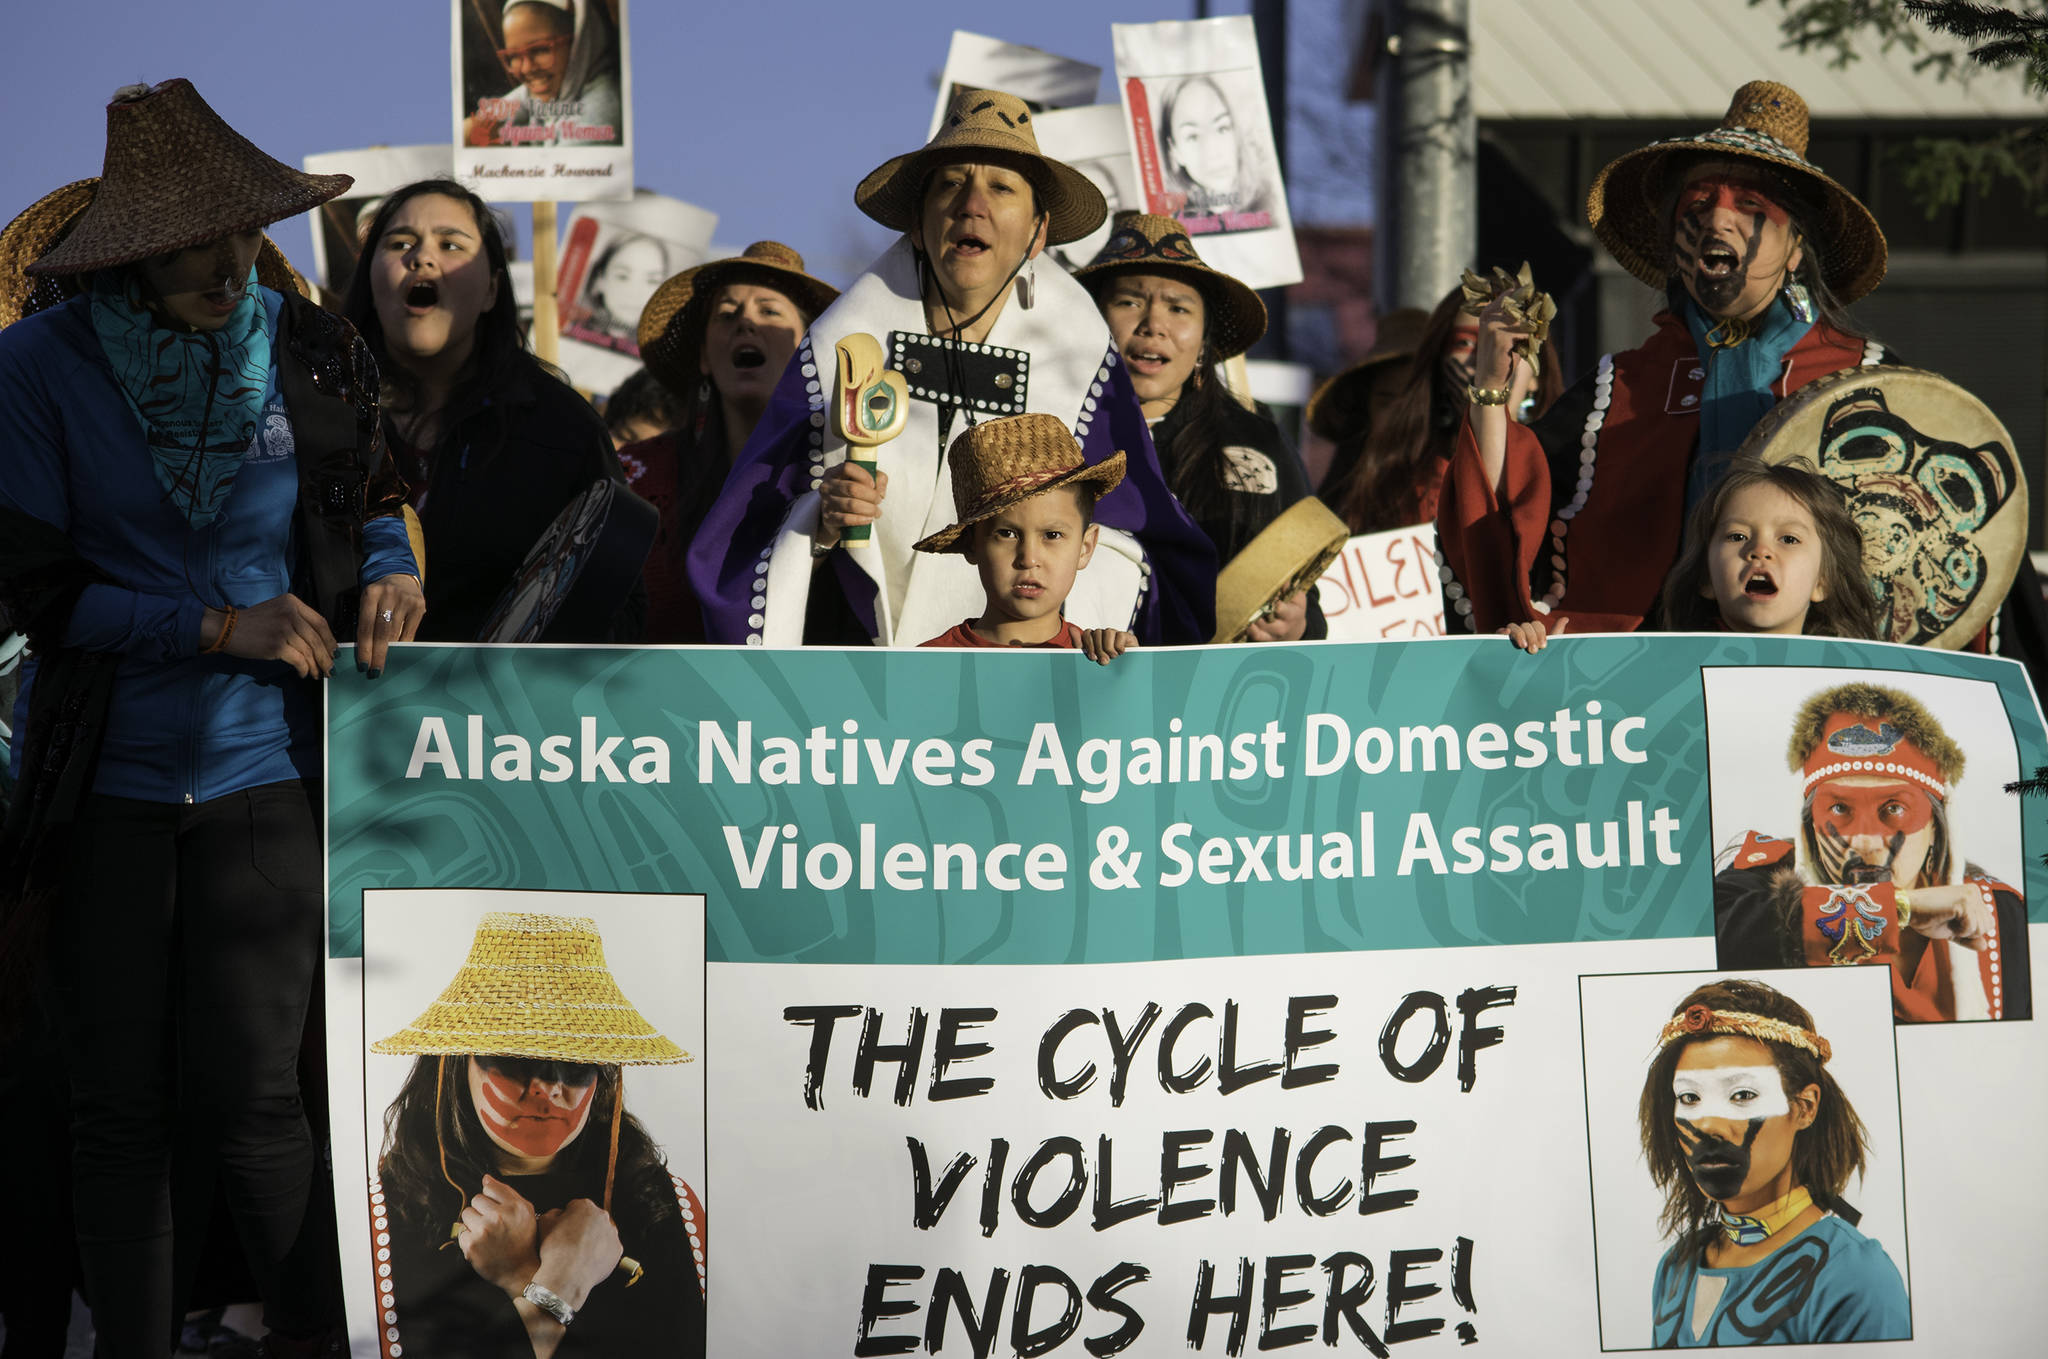 Demonstrators march in the Violence Against Women Awareness Rally near Elizabeth Peratrovich Hall on Friday, April 20, 2018. (Richard McGrail | Juneau Empire)